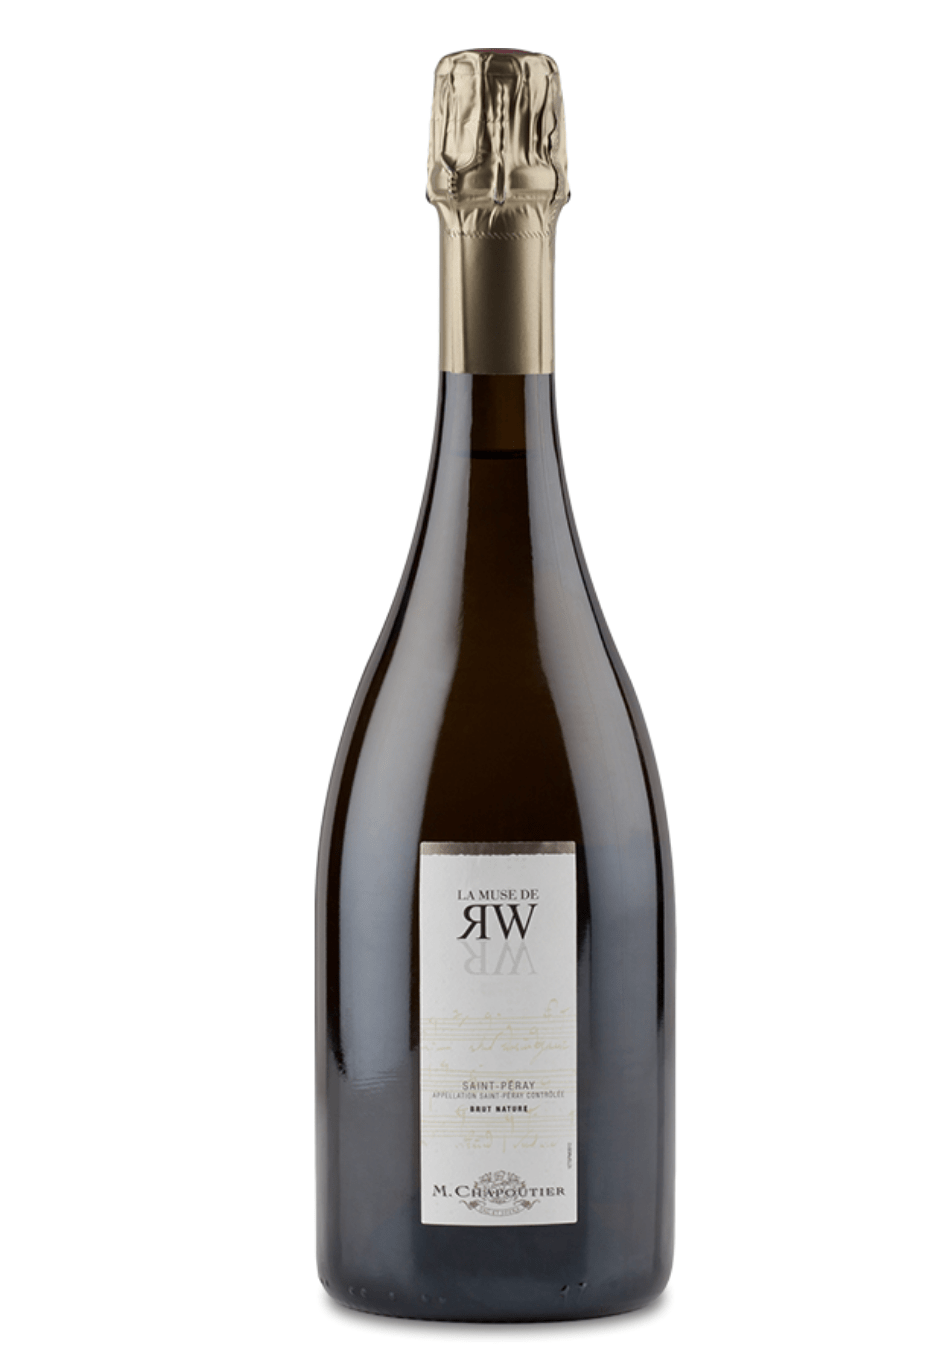 Shop Maison M. Chapoutier Maison M. Chapoutier St. Peray La Muse de RW Brut Nature 2014 online at PENTICTON artisanal French wine store in Hong Kong. Discover other French wines, promotions, workshops and featured offers at pentictonpacific.com 